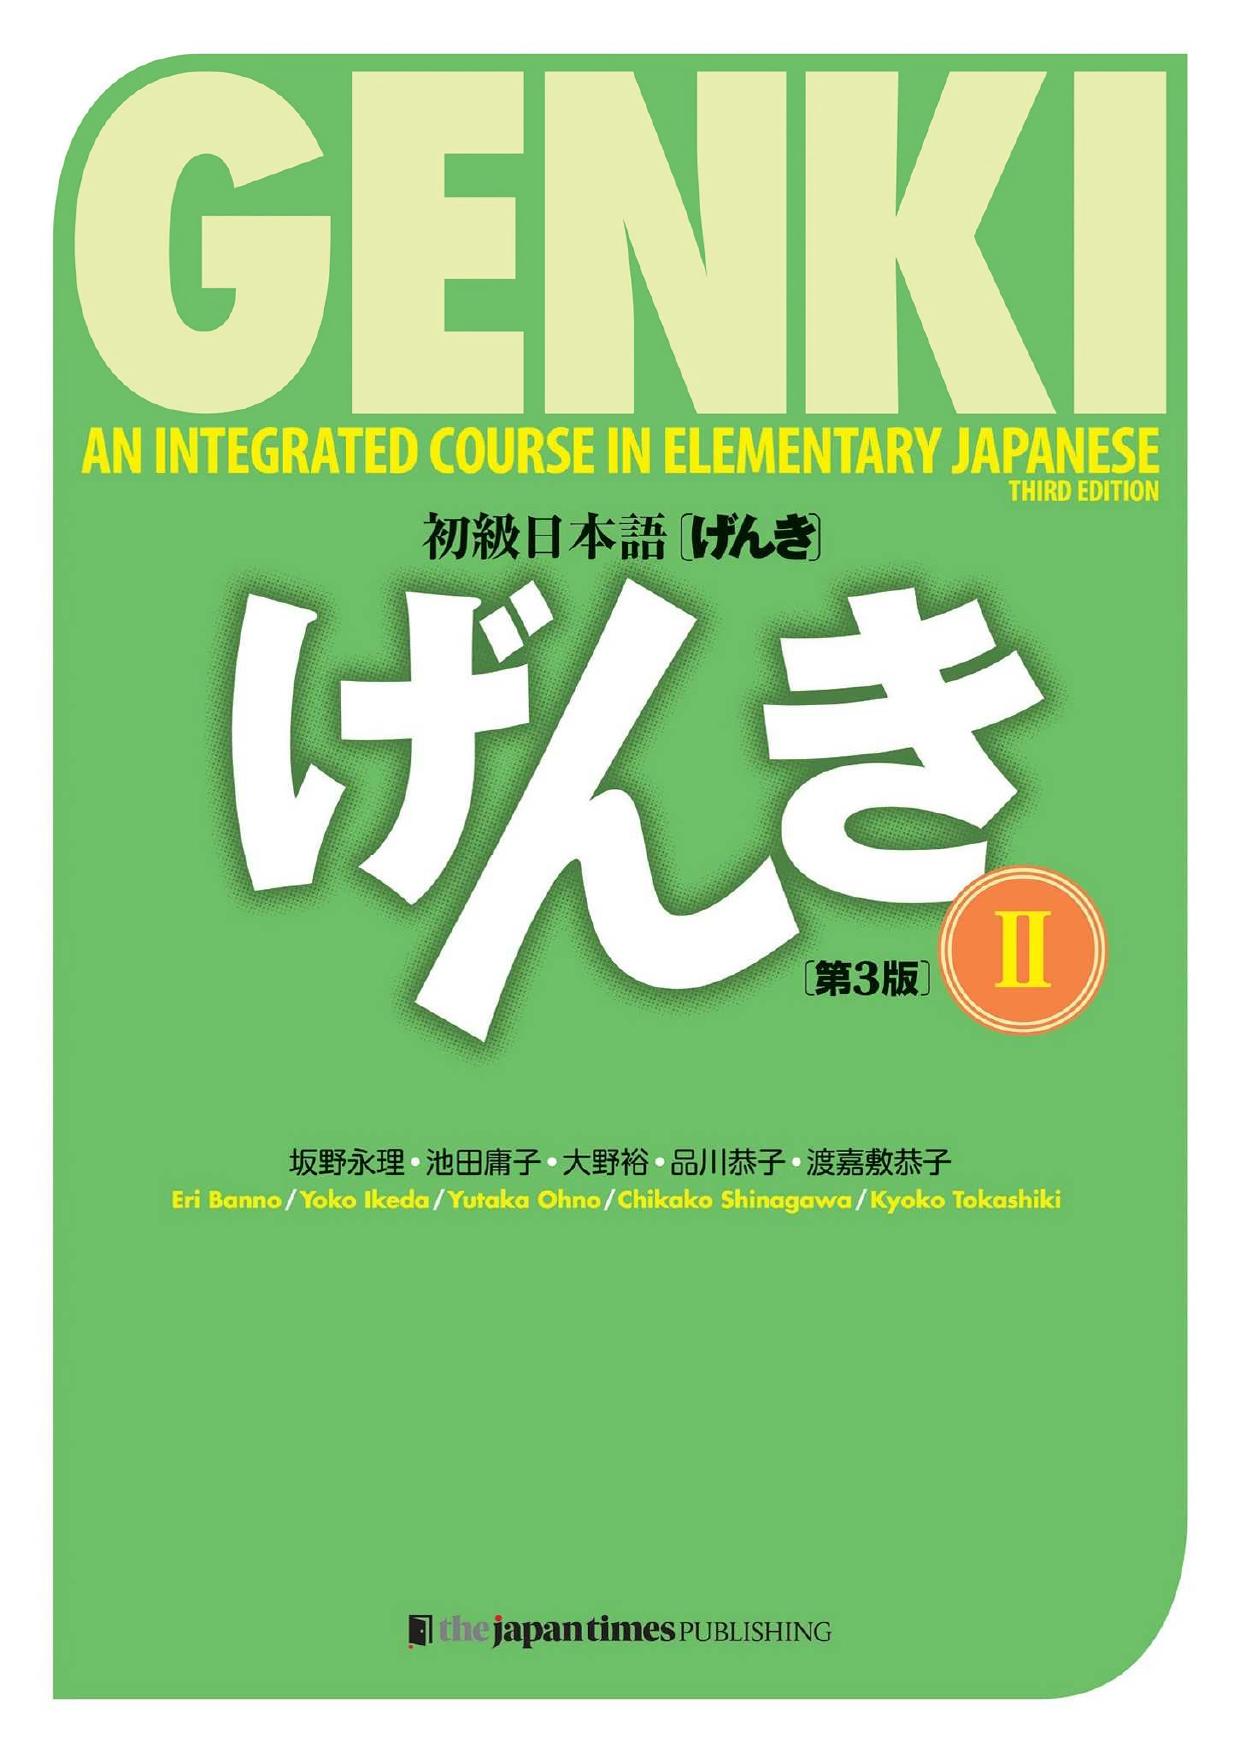 Genki - An Integrated Course in Elementary Japanese II - Textbook [Third Edition] by Textbook